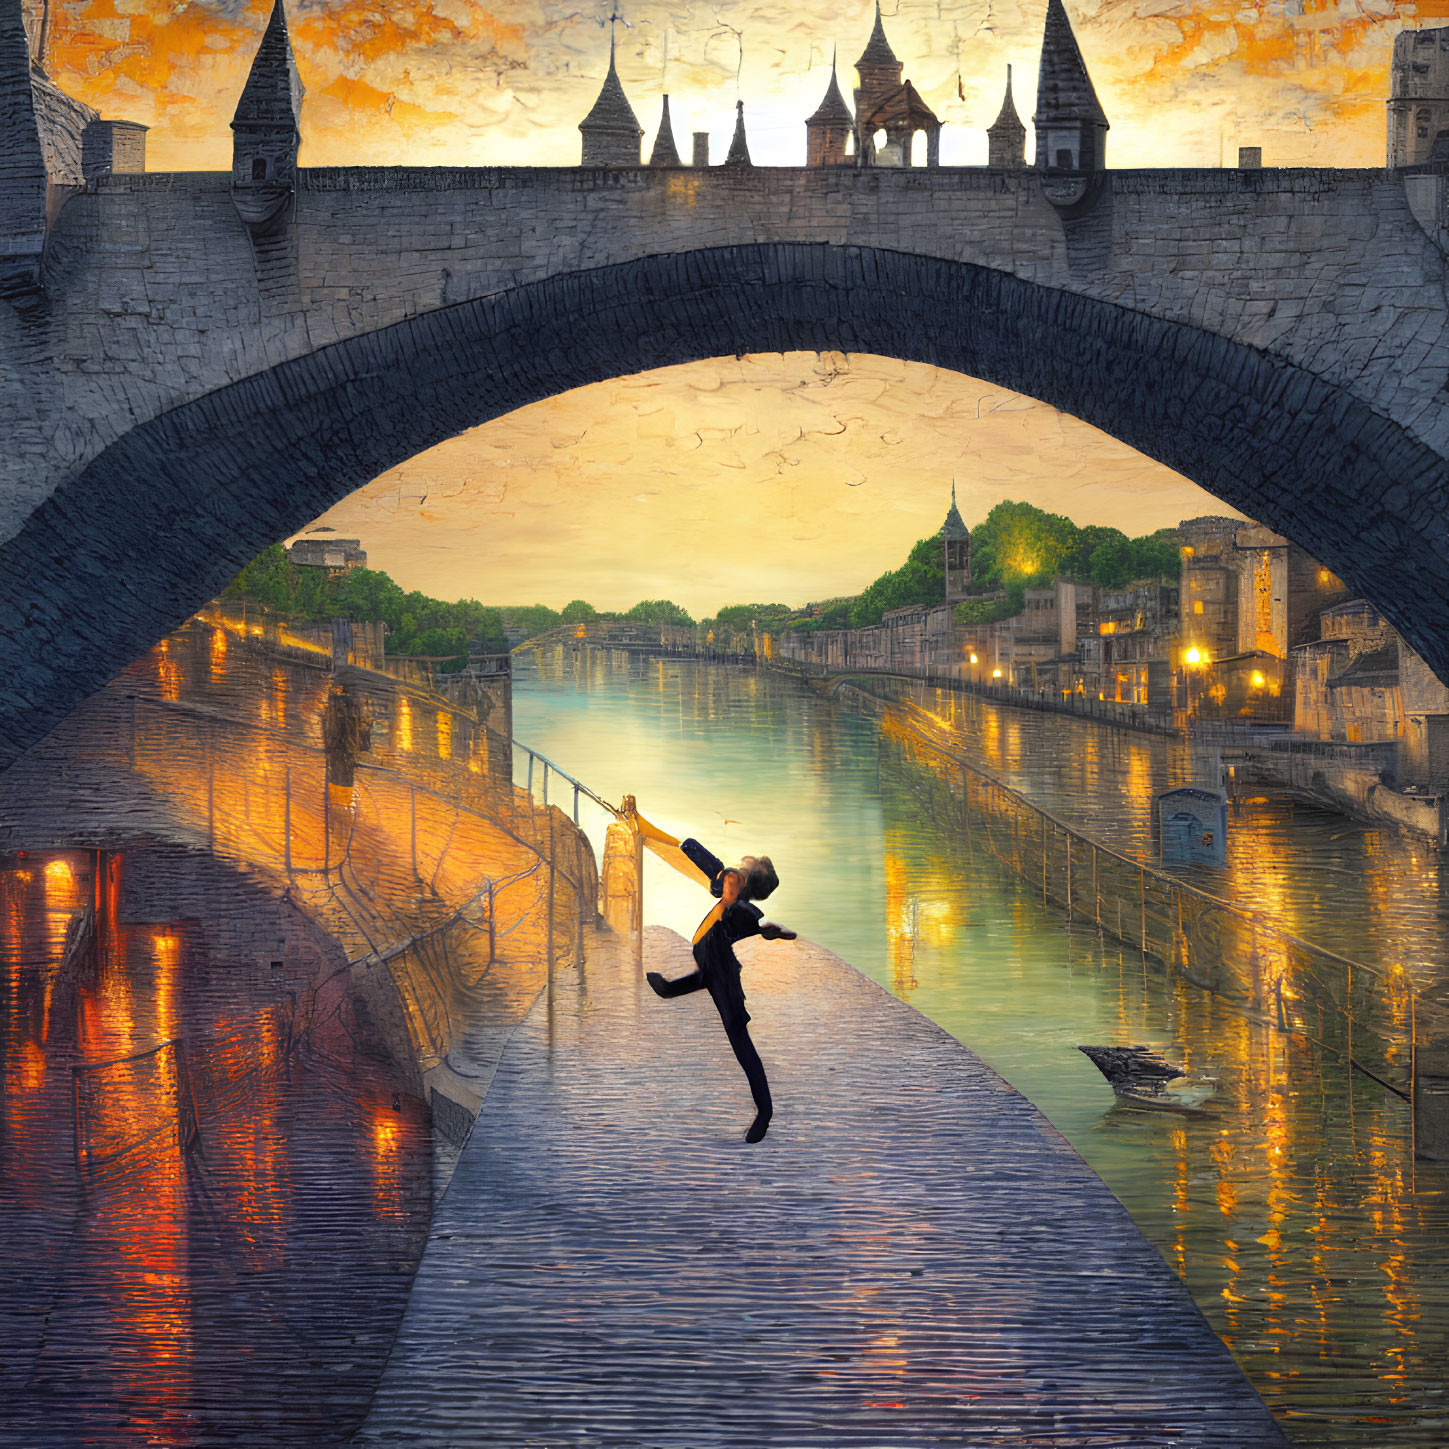 Person hanging from rope under arch bridge with serene river and sunset sky